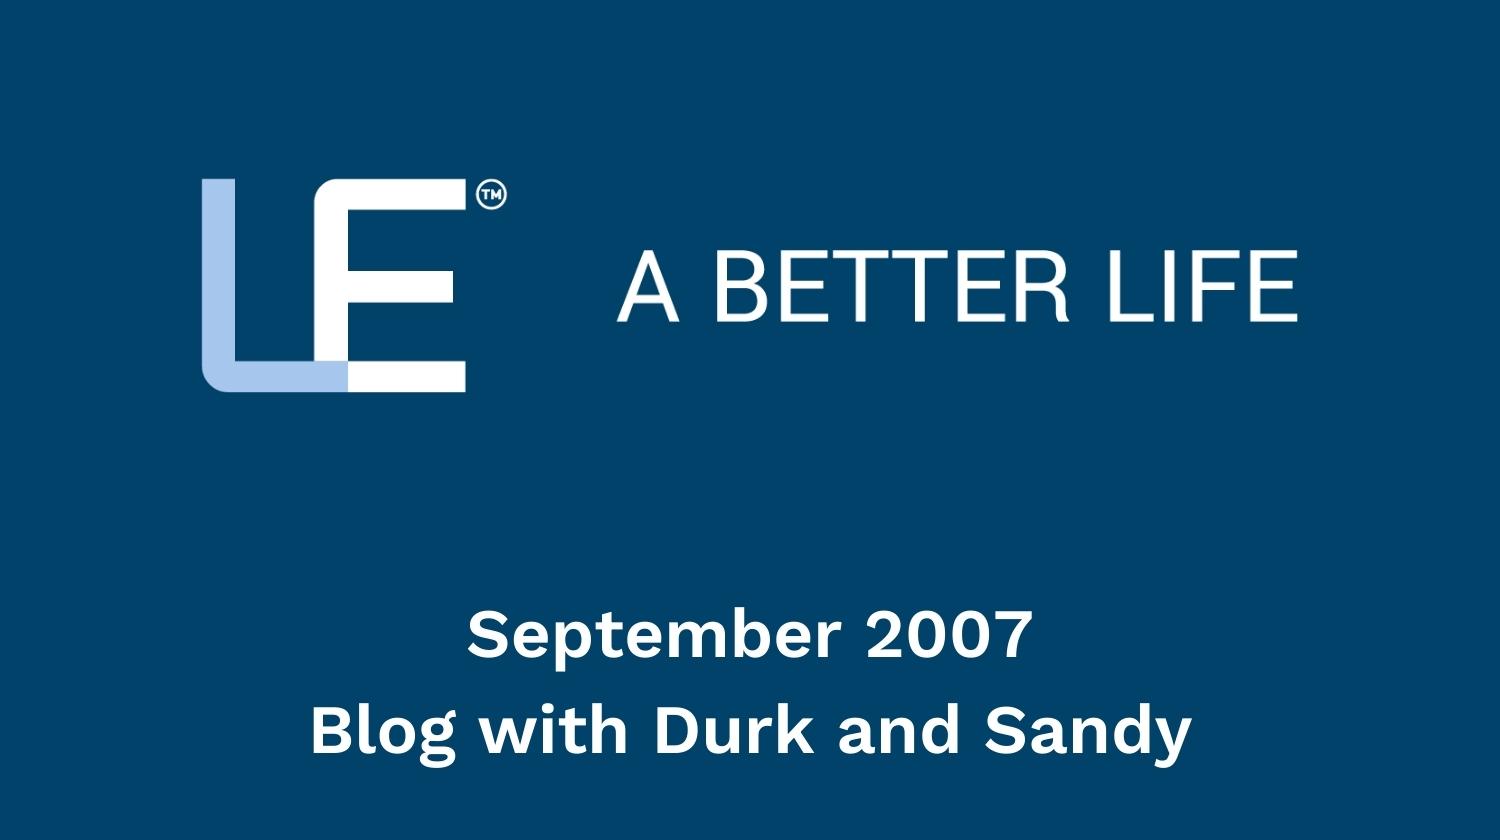 September 2007 Blog with Durk and Sandy